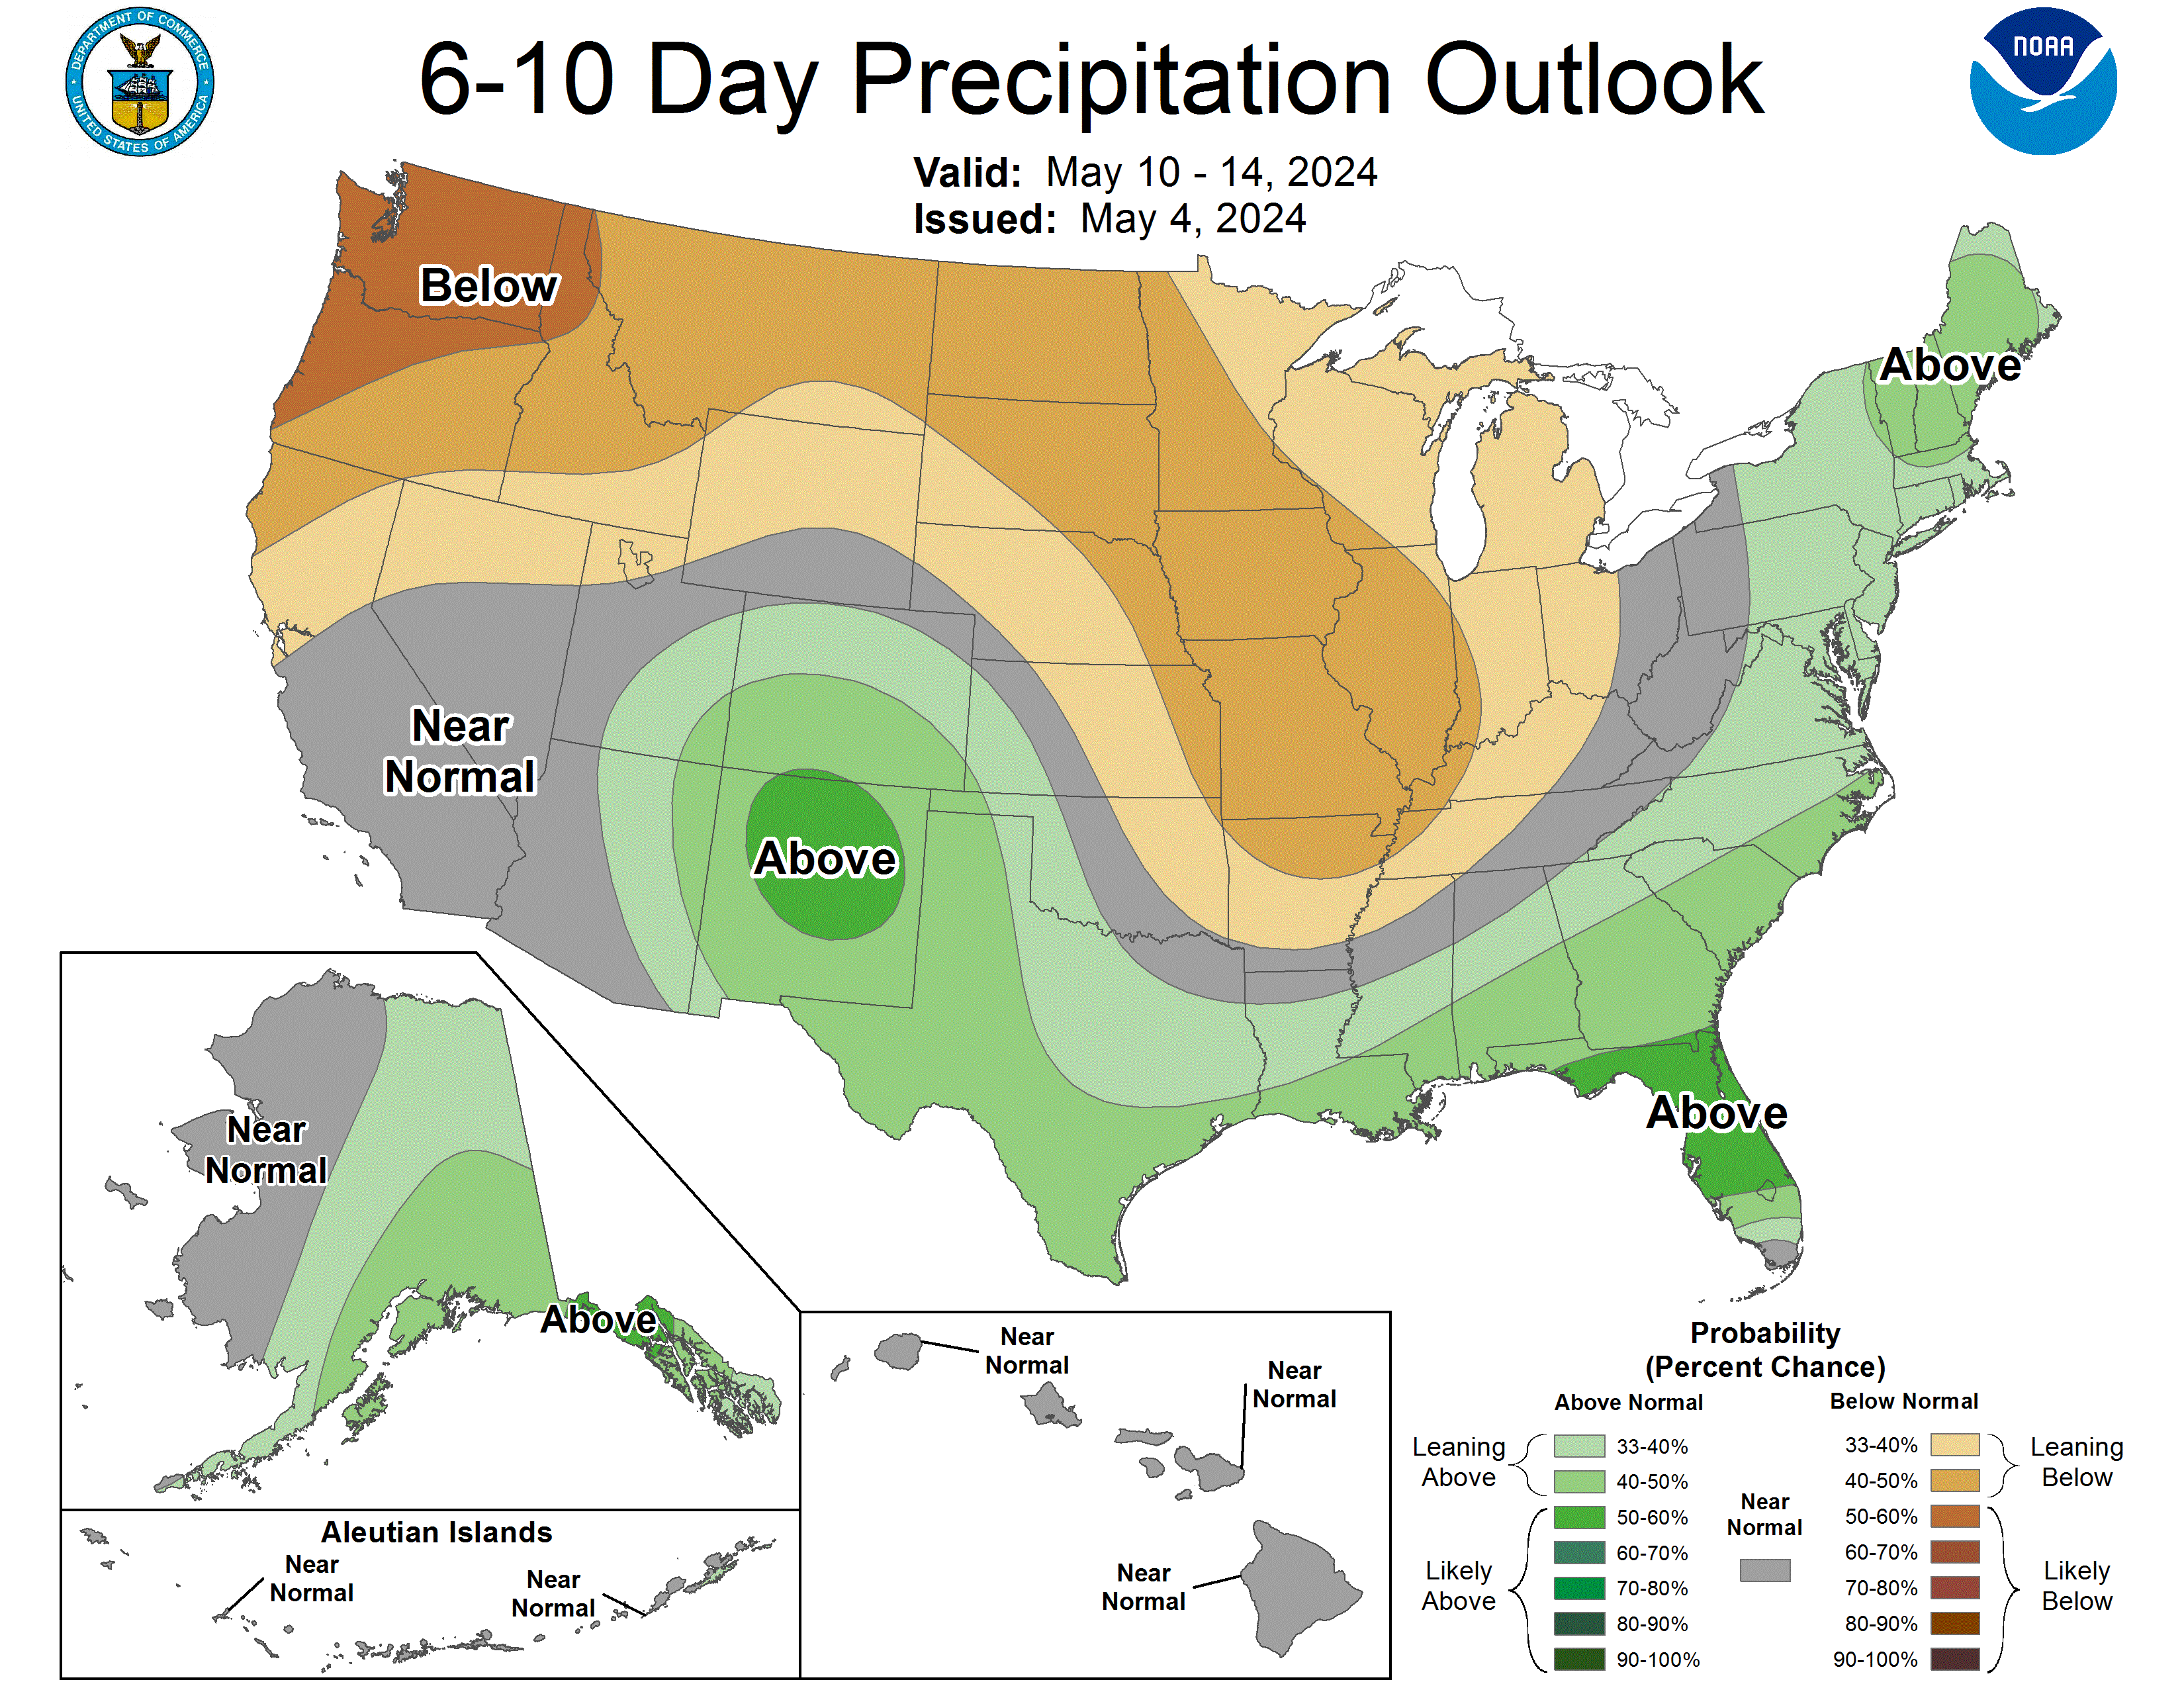 http://www.cpc.ncep.noaa.gov/products/predictions/610day/610prcp.new.gif